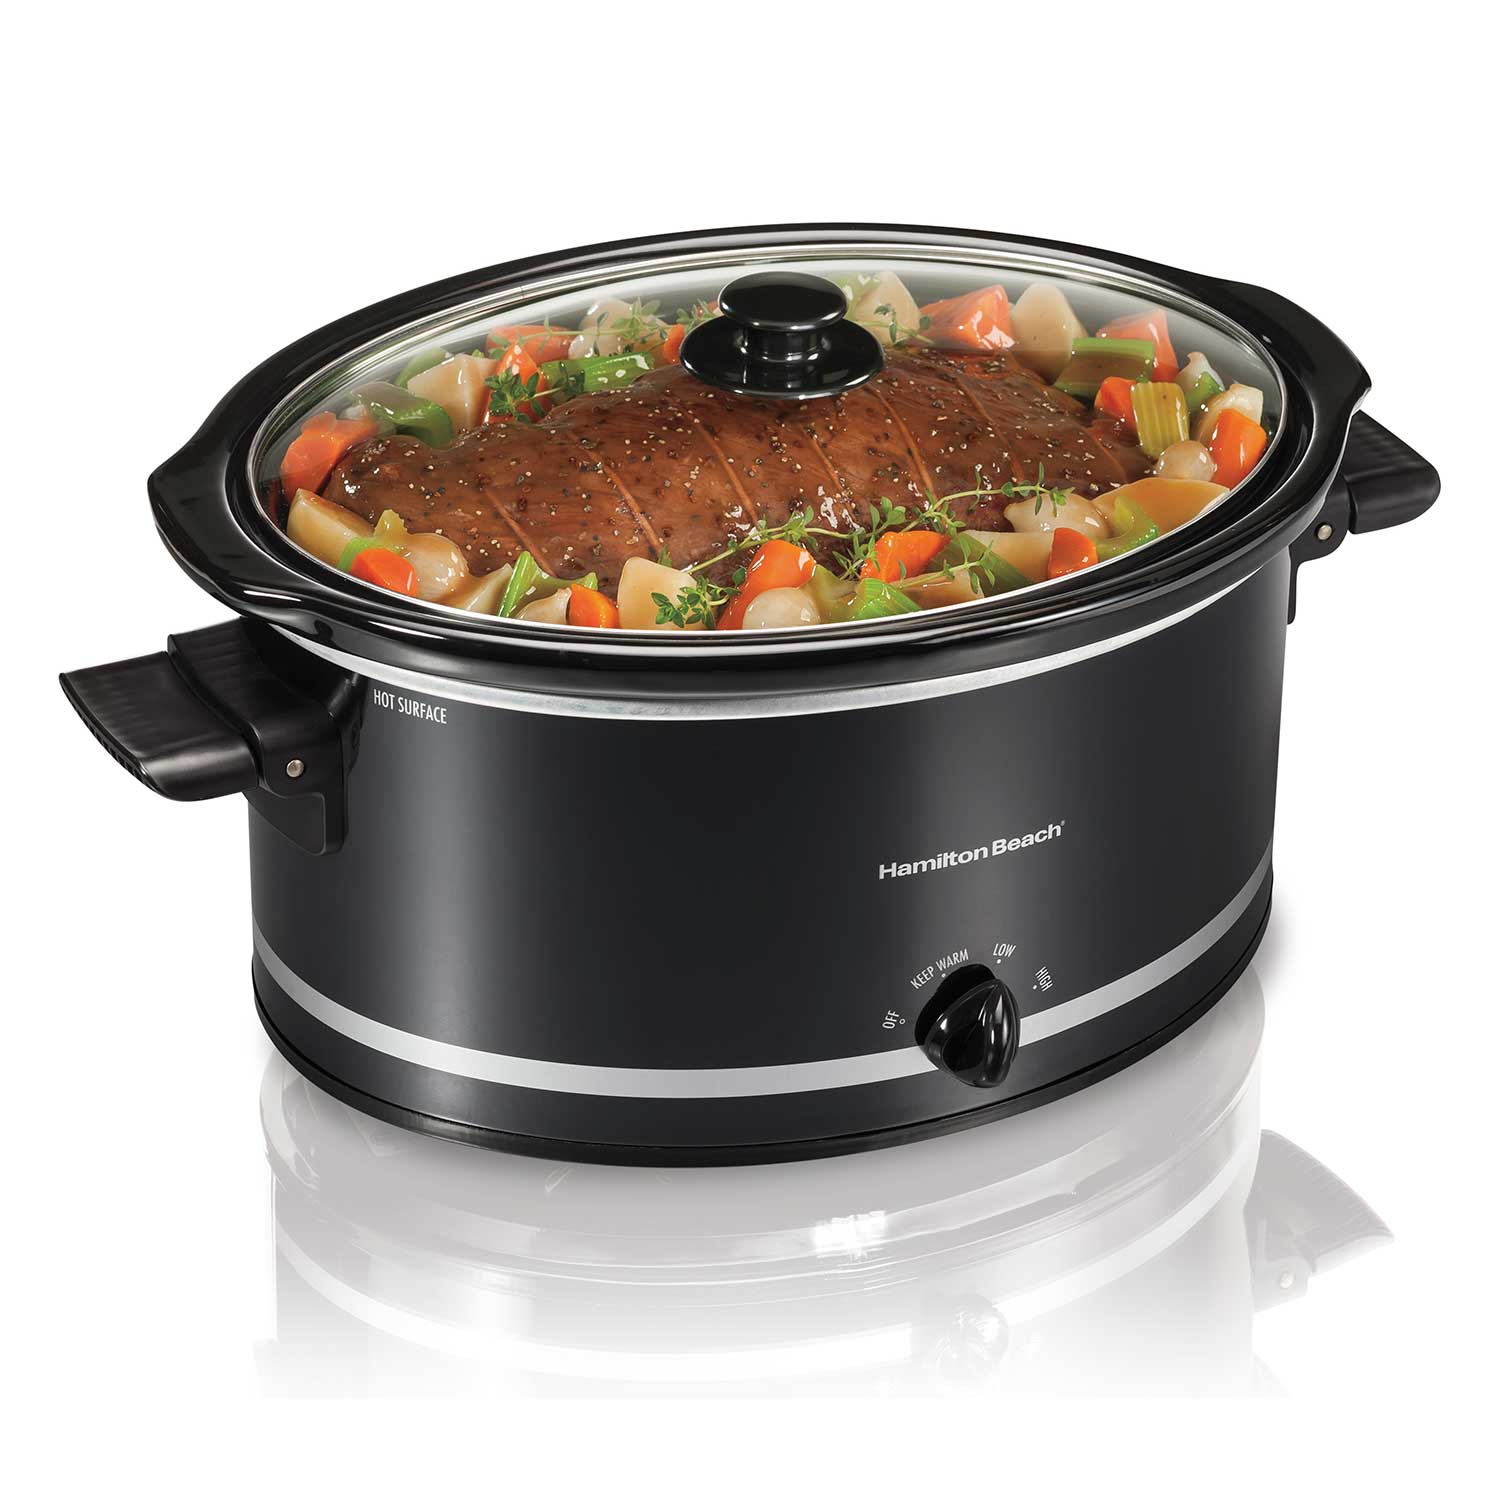 Recertified 8 Quart Oval Slow Cooker (R33185)